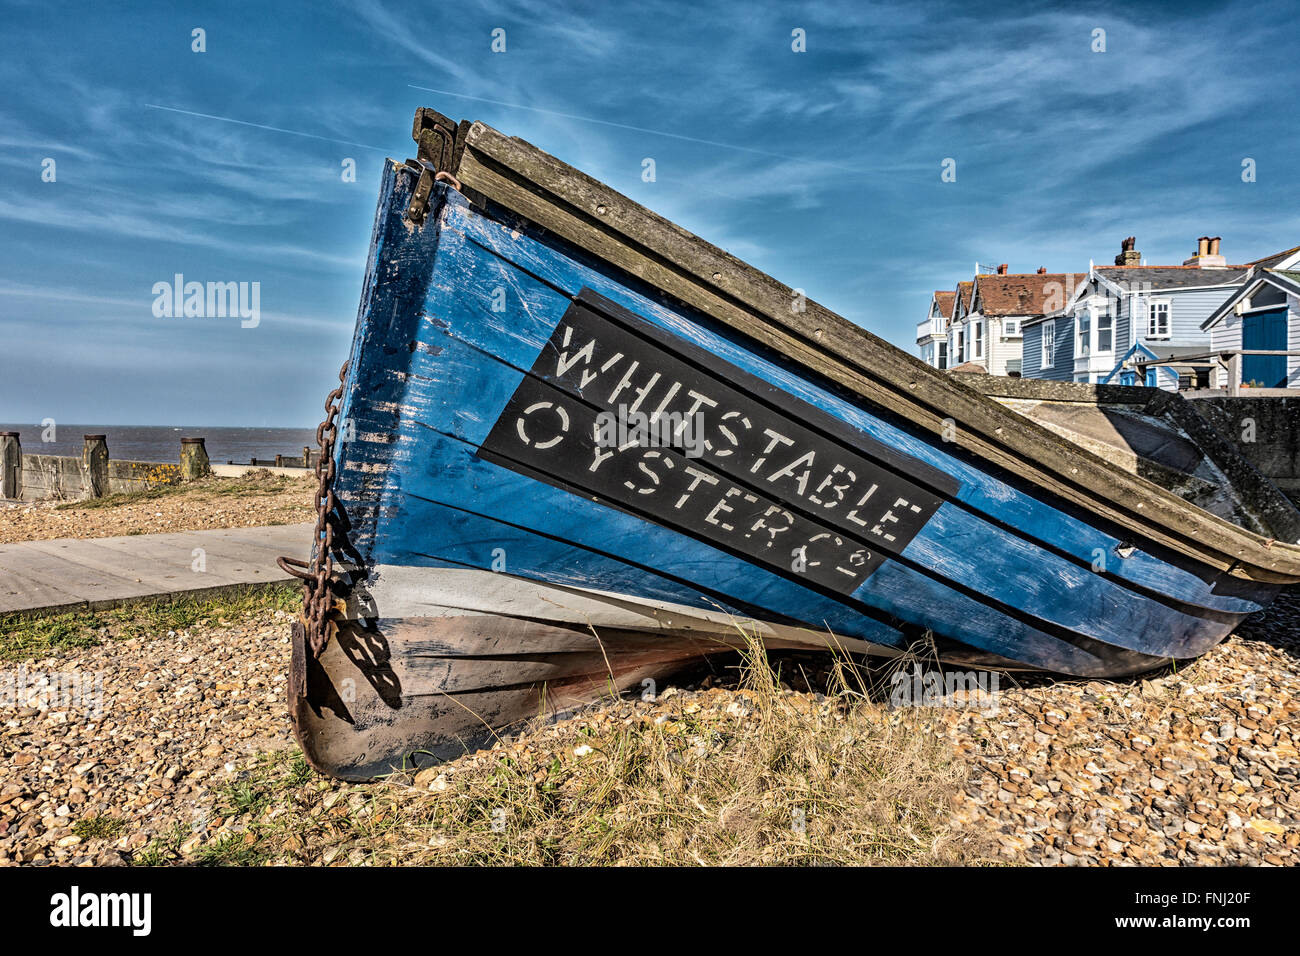 Whitstable Oyster Company Boot Whitstable Strand Kent England Stockfoto